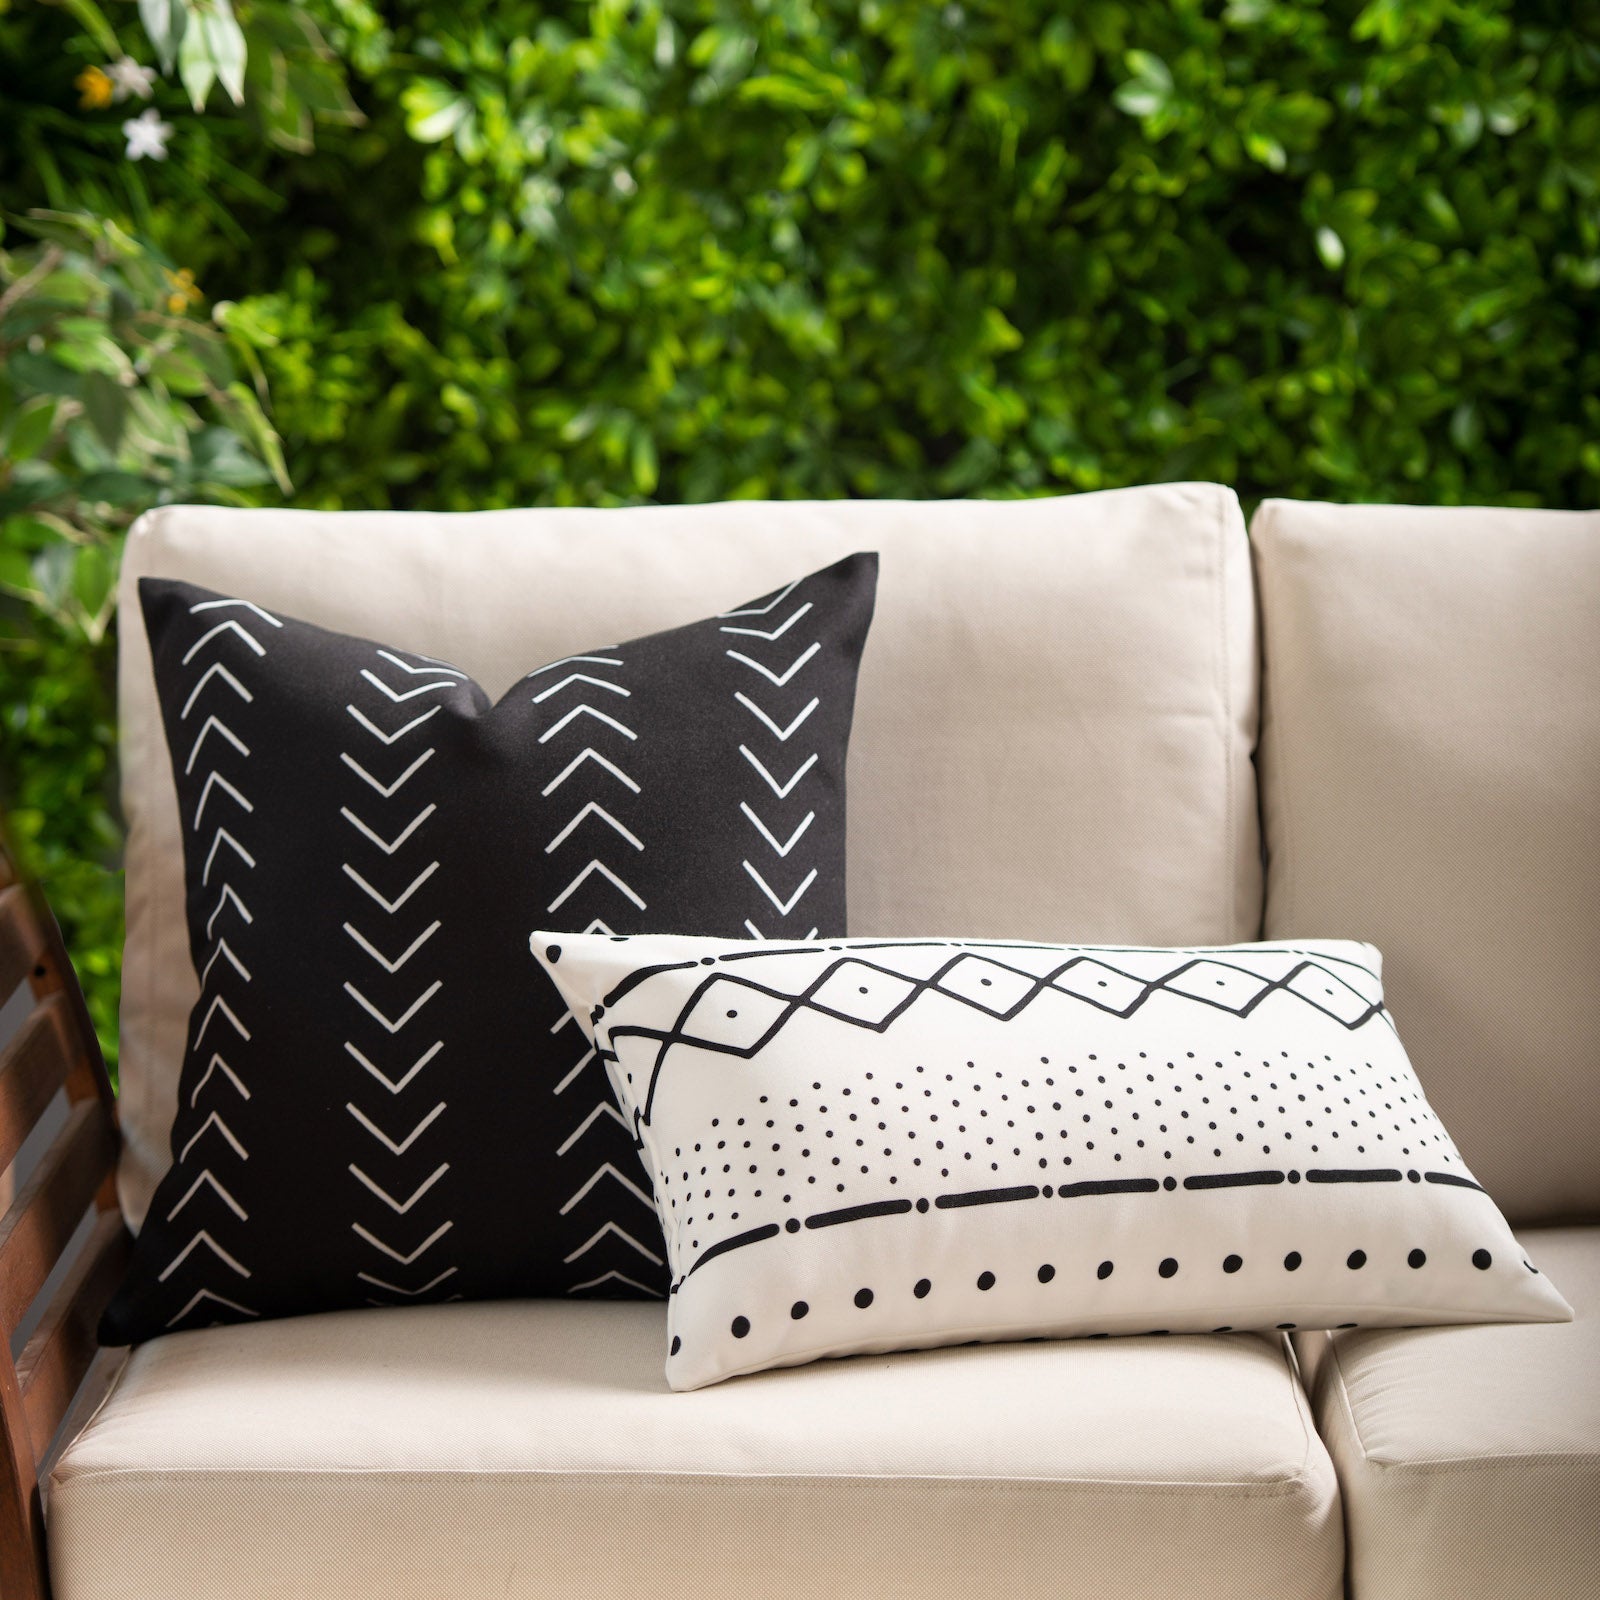 Mudcloth Inspired Outdoor Pillow Cover, Arrowhead Black, 18"x18"